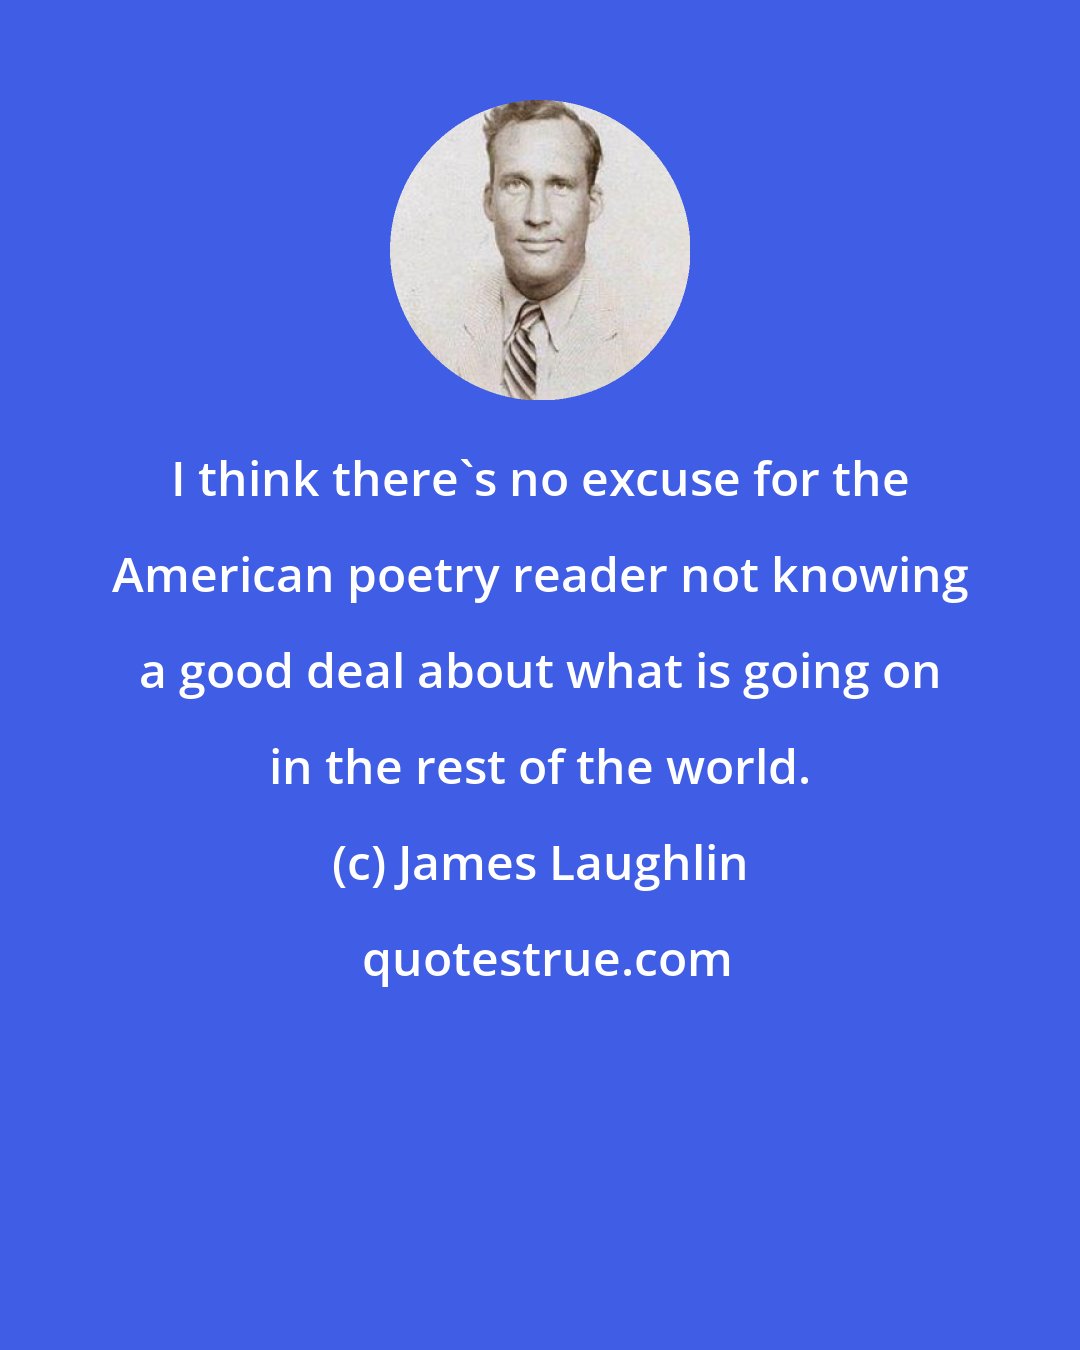 James Laughlin: I think there's no excuse for the American poetry reader not knowing a good deal about what is going on in the rest of the world.